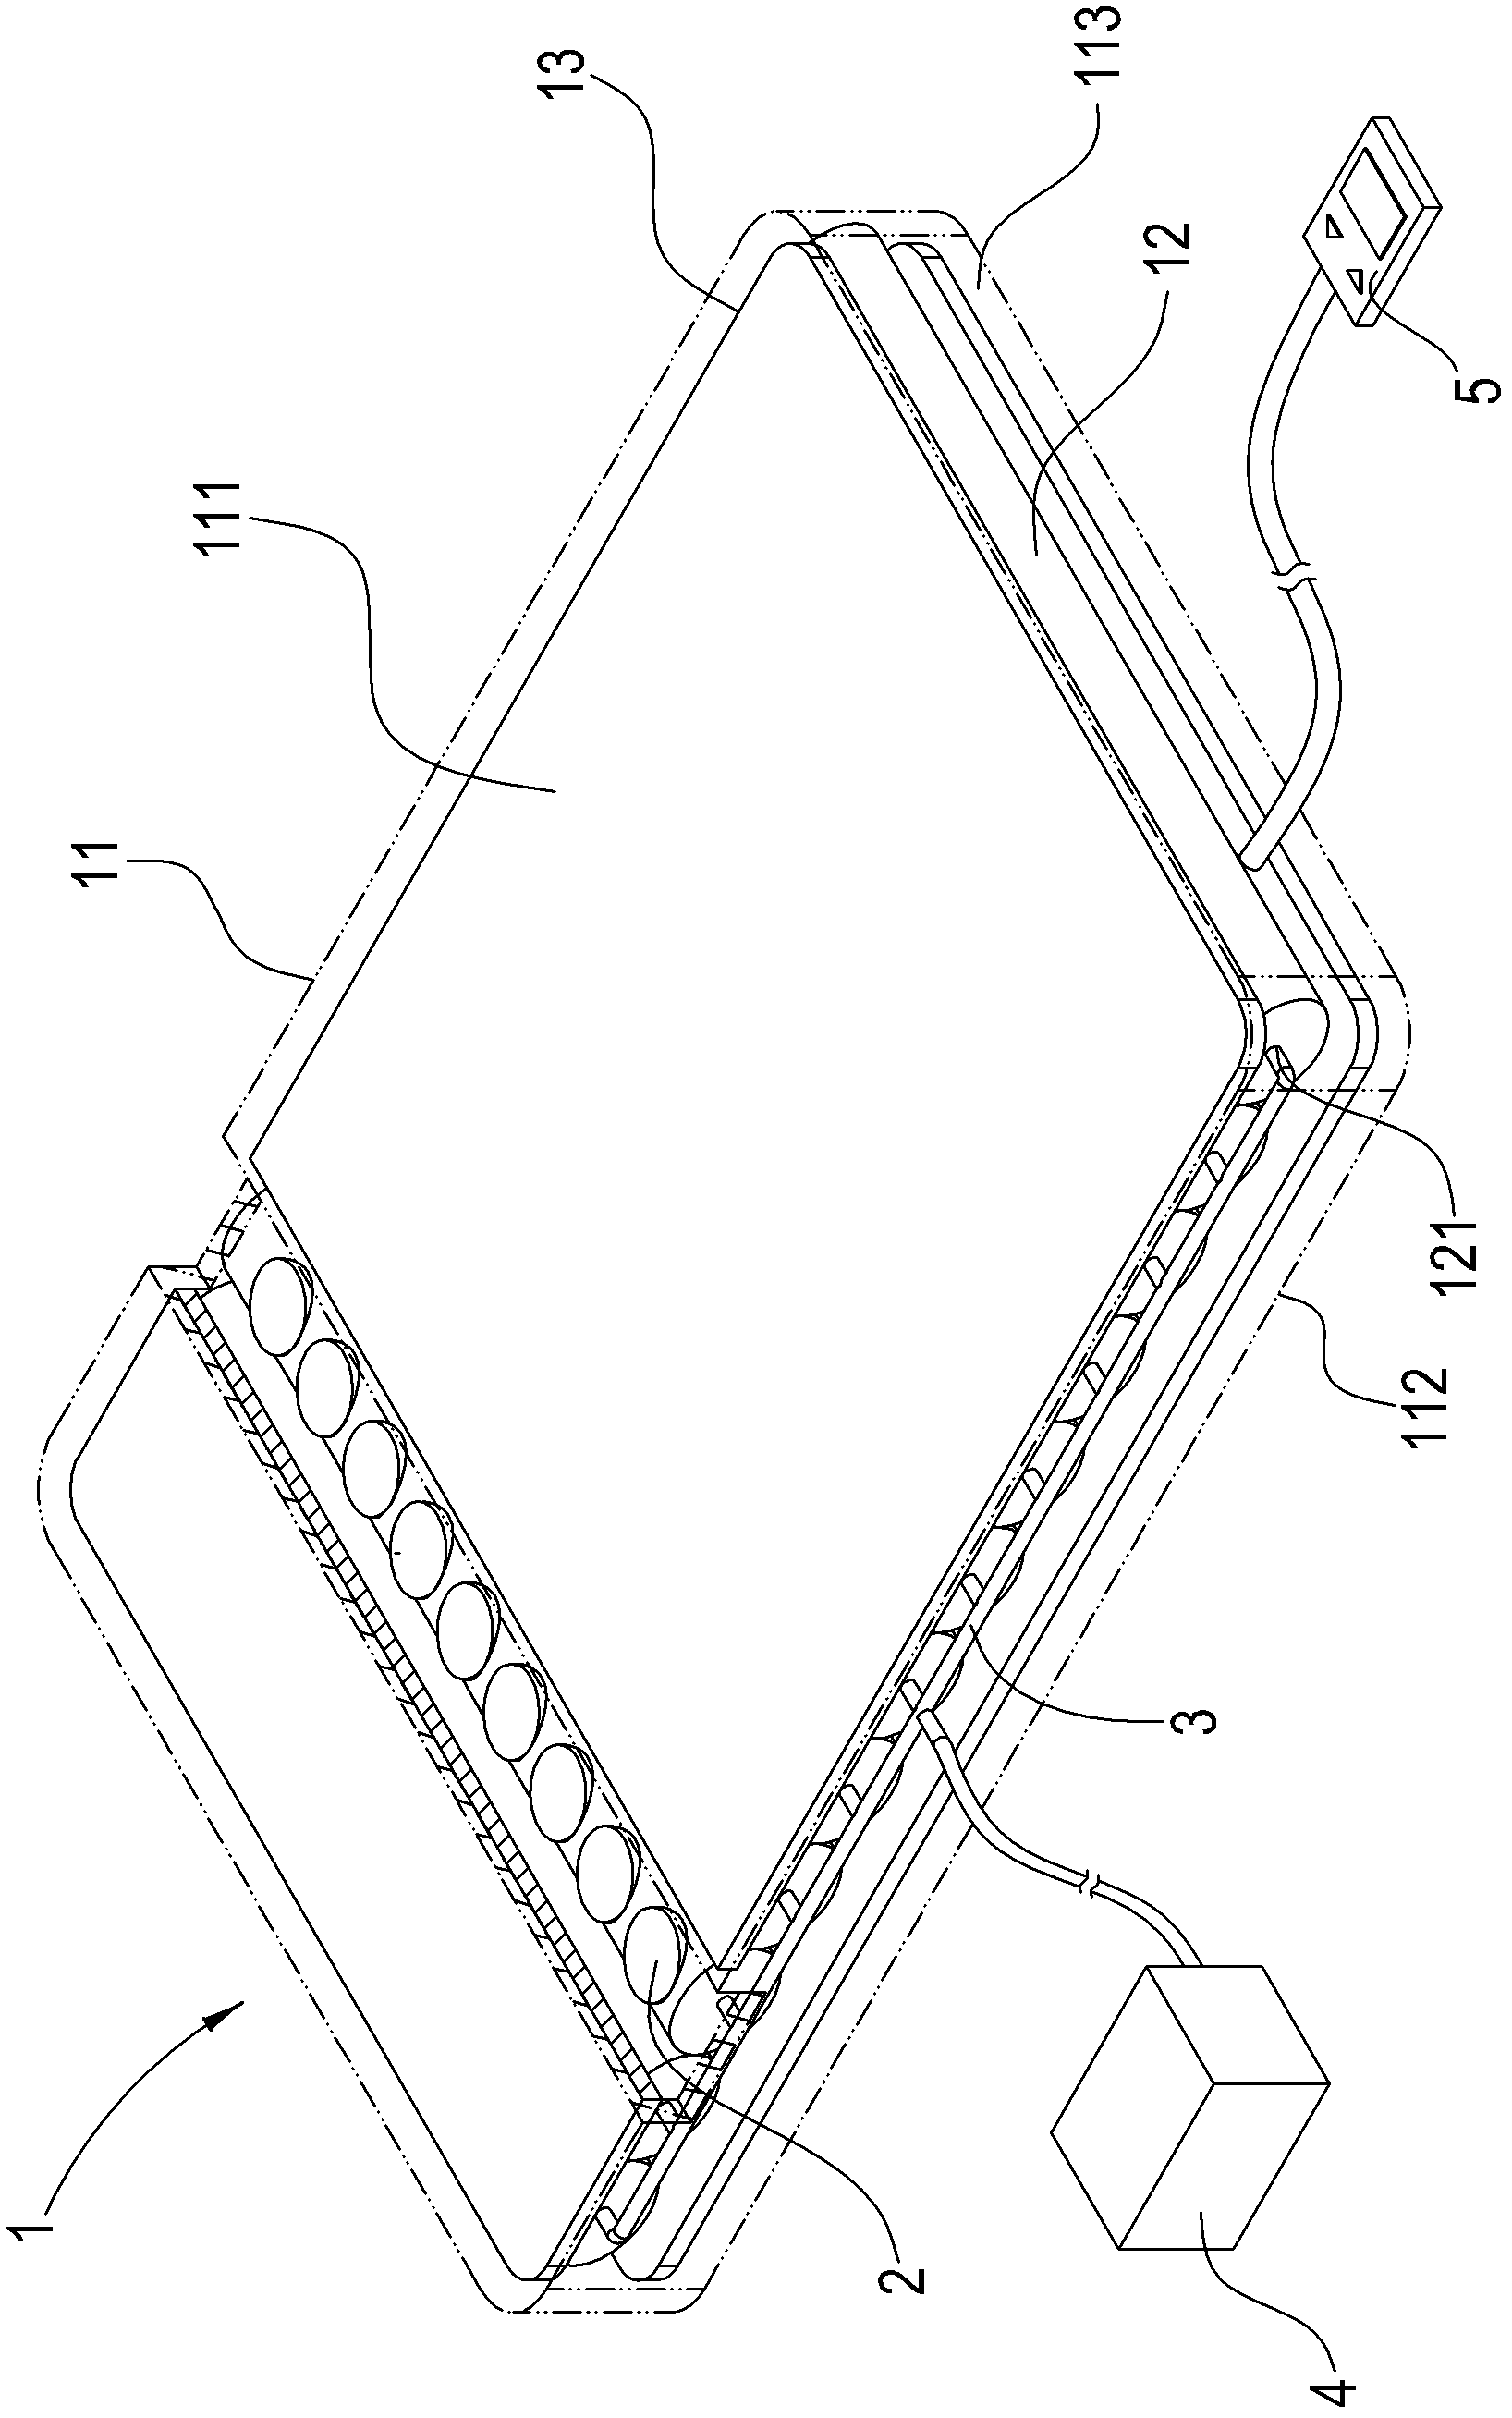 Apparatus for automatically adjusting hardness of air cushion bed according to supine or side lying sleeping positions, and method thereof